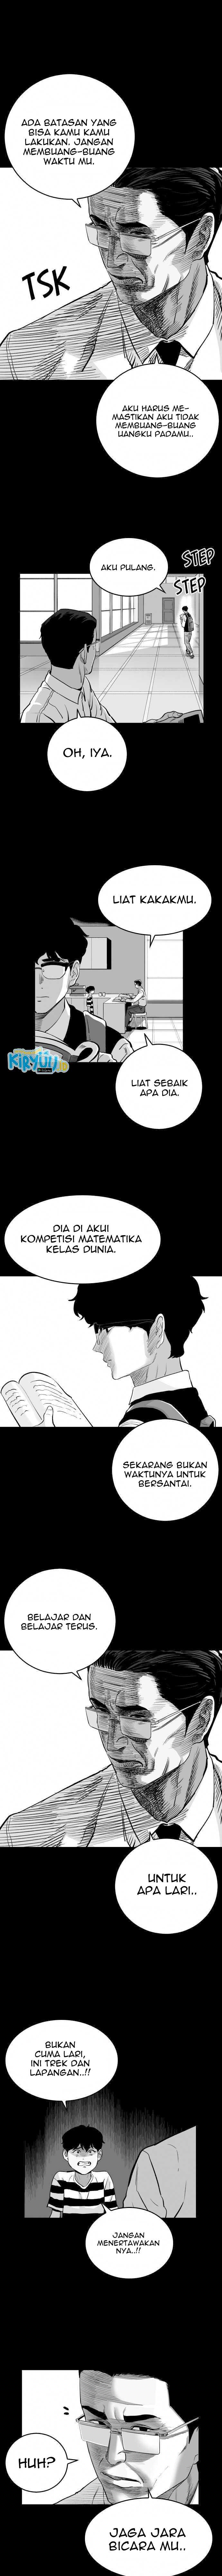 Build Up Chapter 46